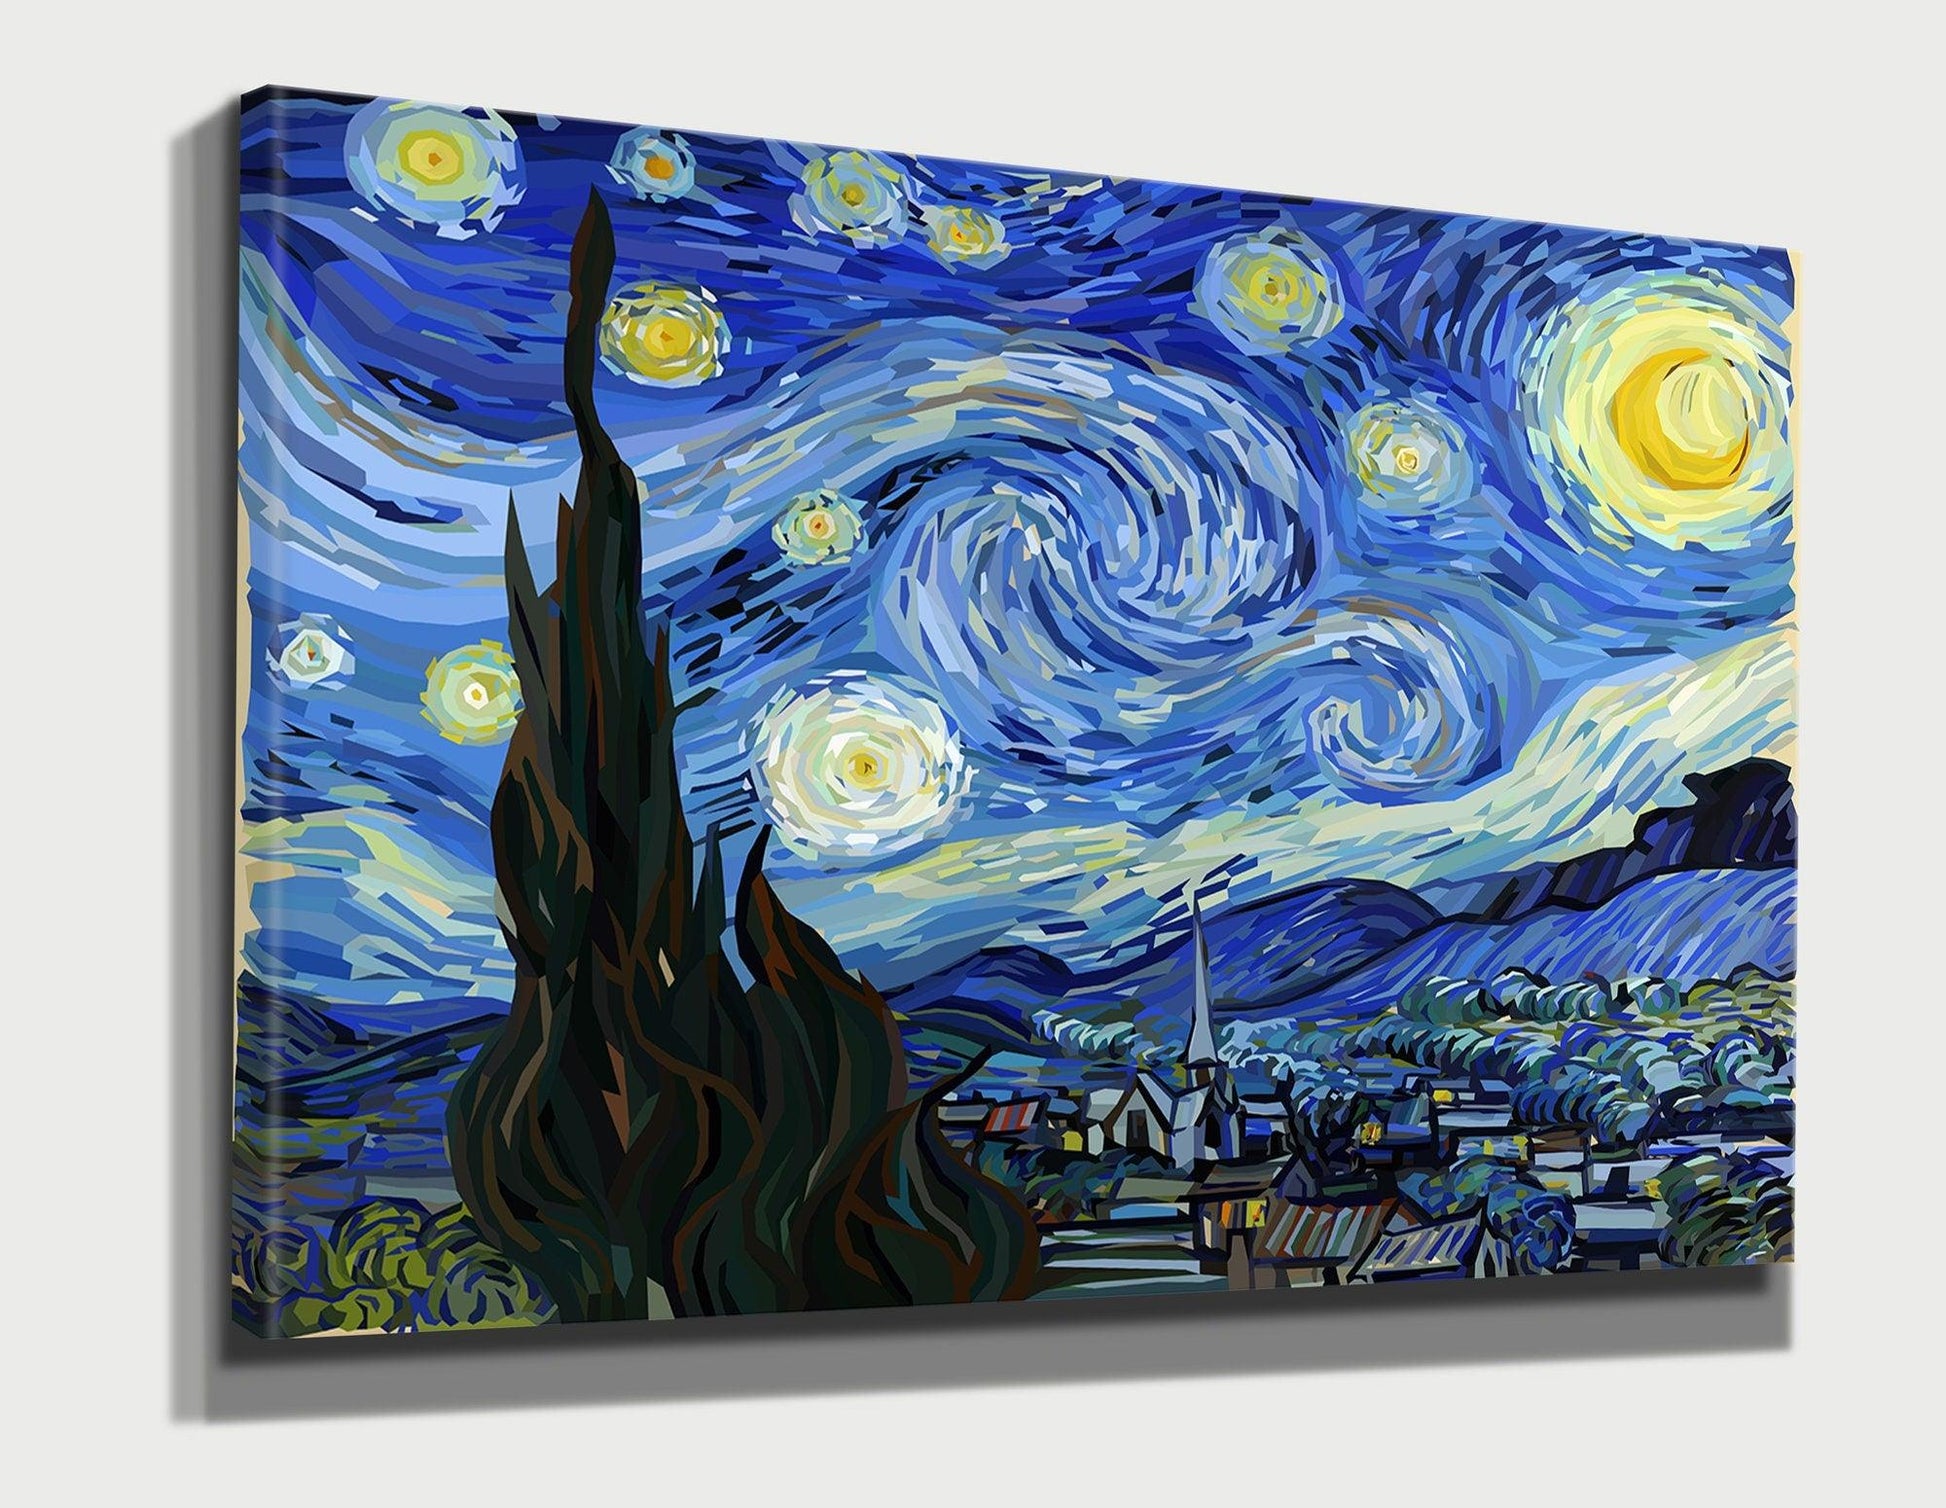 The Starry Night Canvas (1889) | Vincent Van Gogh Poster, 3 piece wall art canvas, large wall art, Home Living Decor, printable wall art